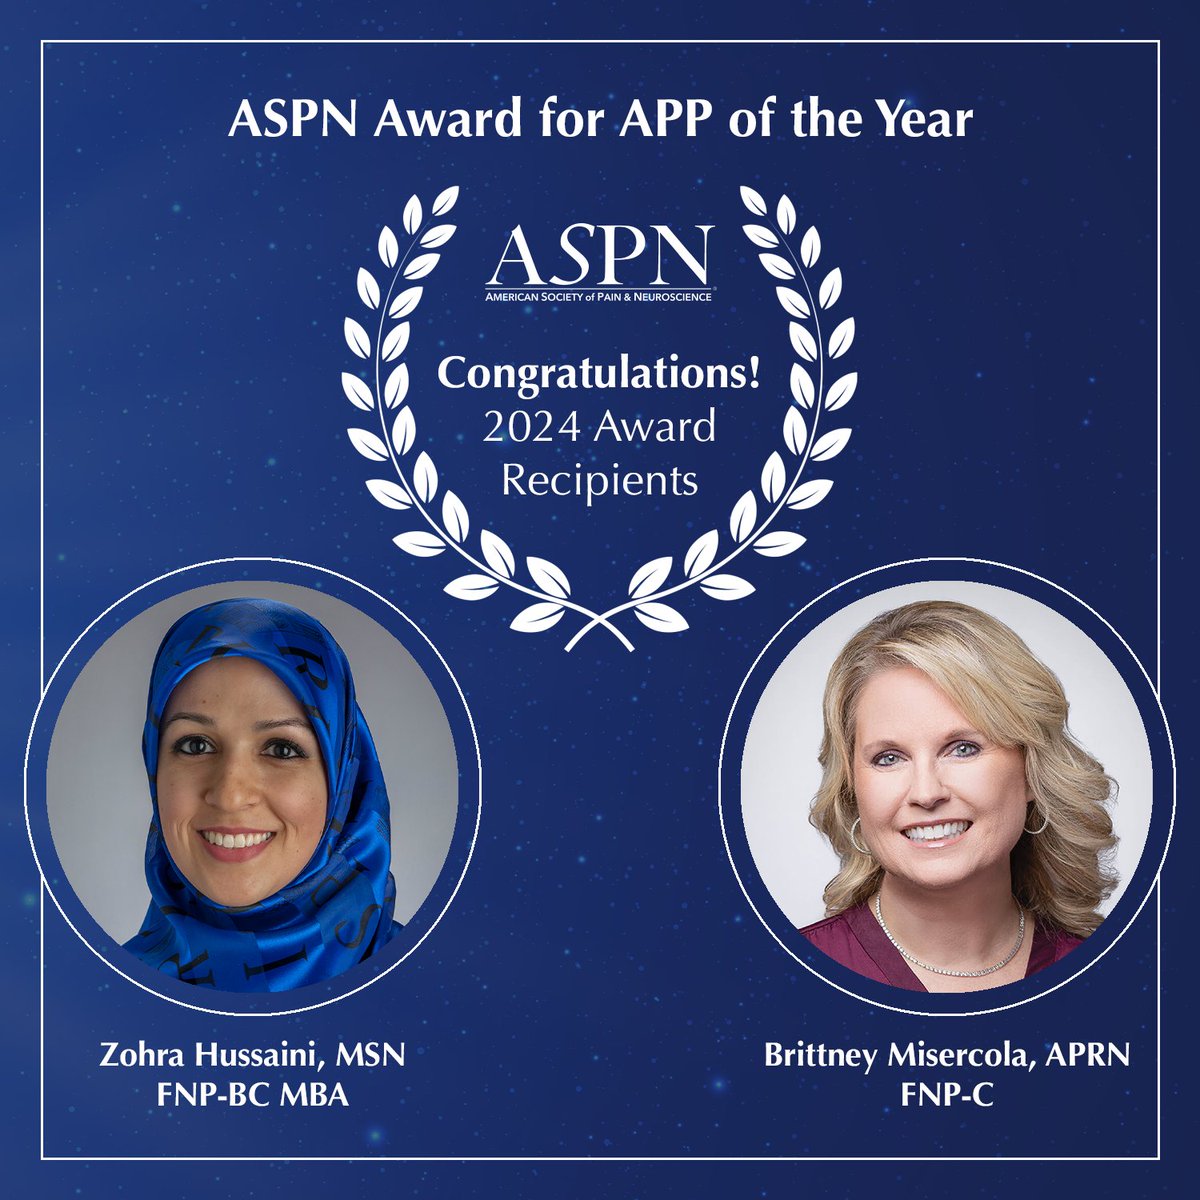 Congratulations to Zohra Hussaini MSN, FNP-BC, MBA and Brittney Misercola MSN, APRN, FNP-C, CFRN on being awarded the Advanced Practice Provider of the Year from ASPN! #ASPNAward #ASPN2024